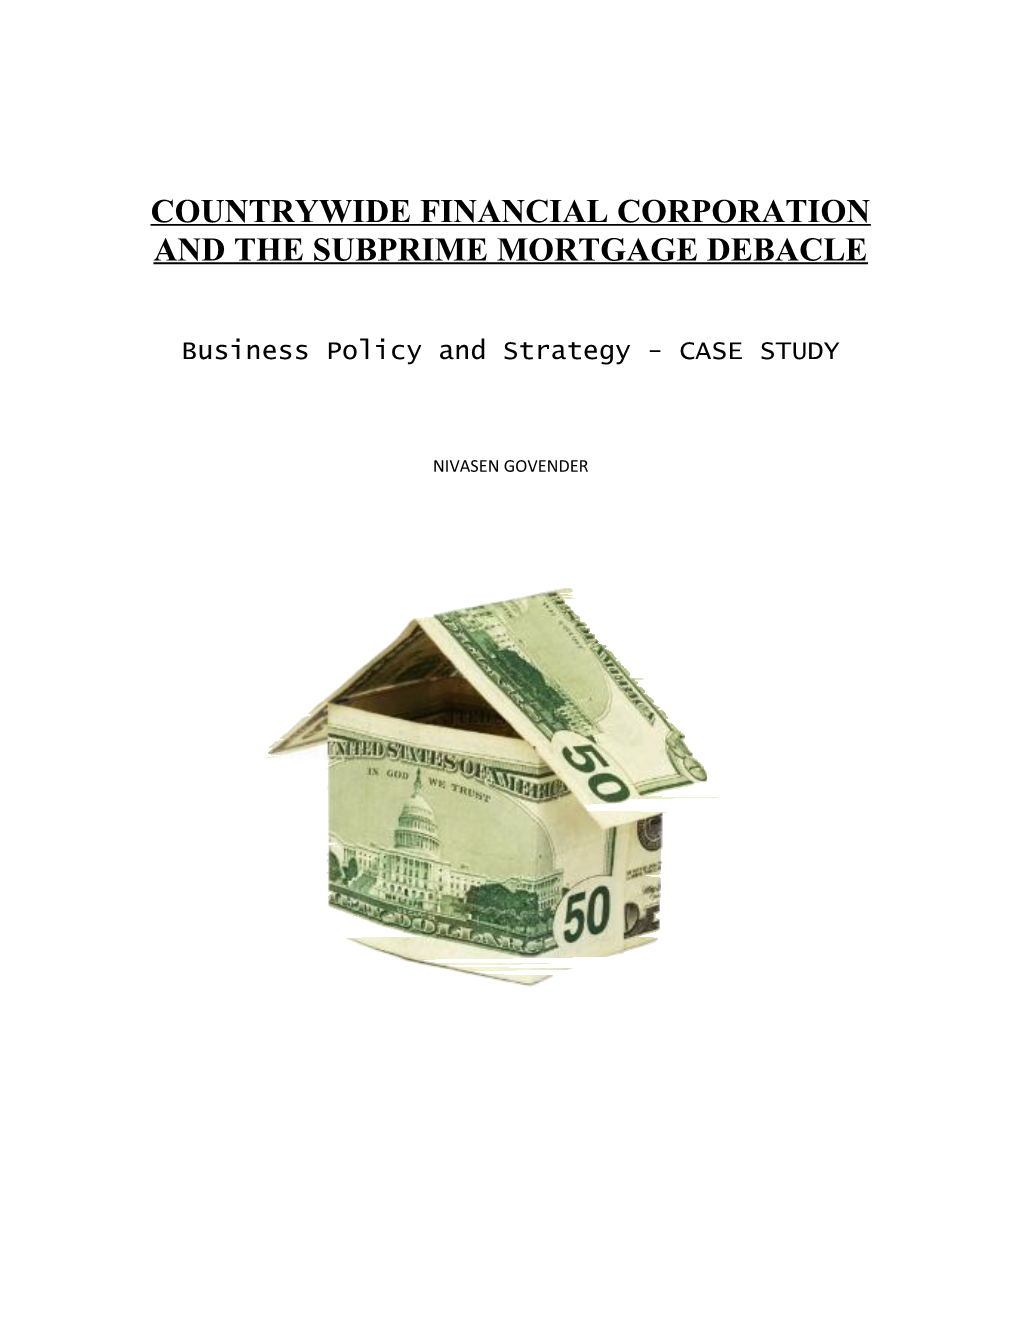 Countrywide Financial Corporation and the Subprime Mortgage Debacle